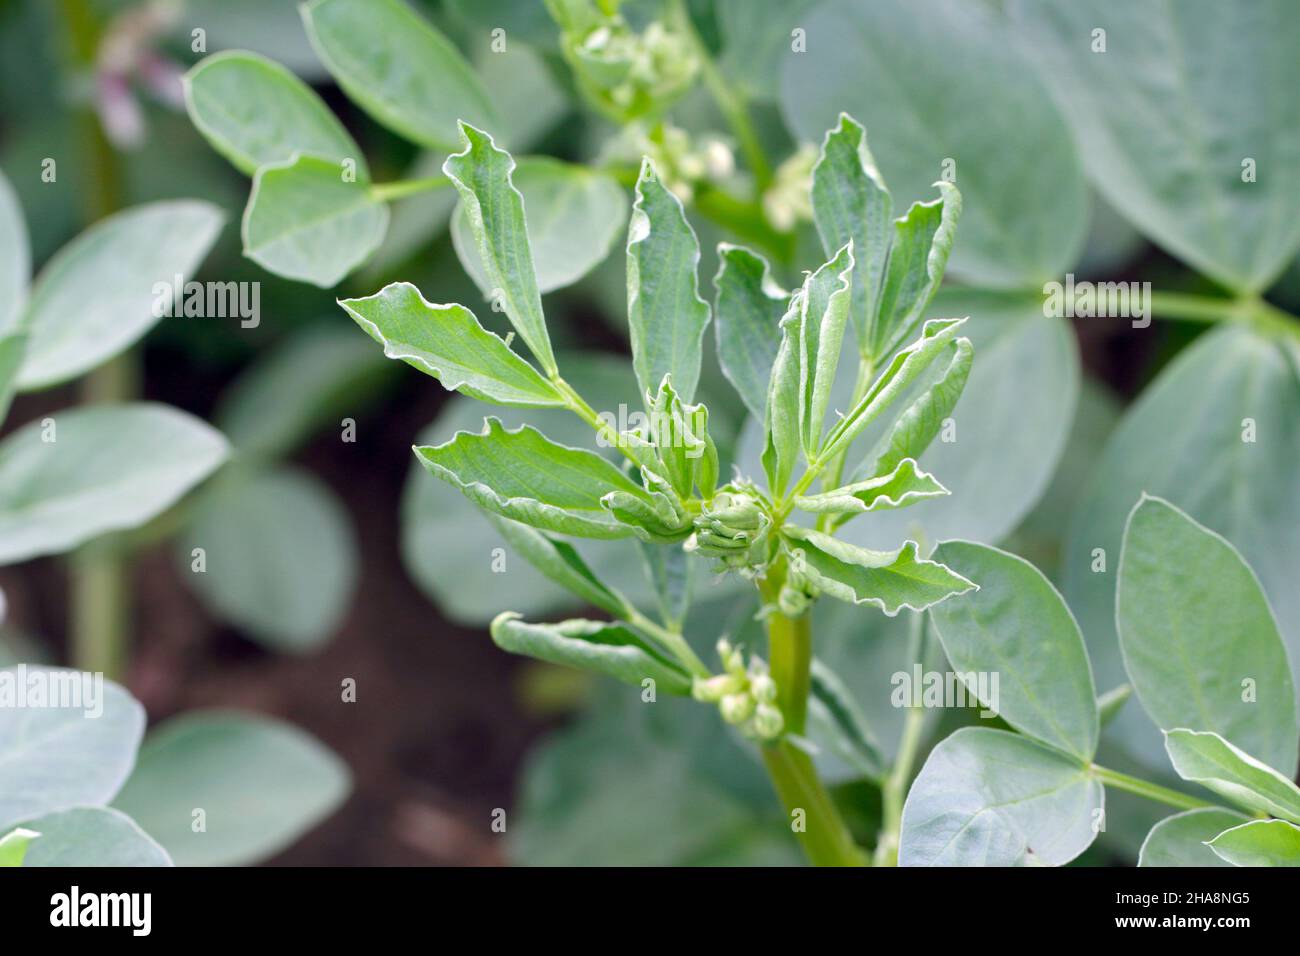 Wilting of broad bean plants due to infection. Stock Photo